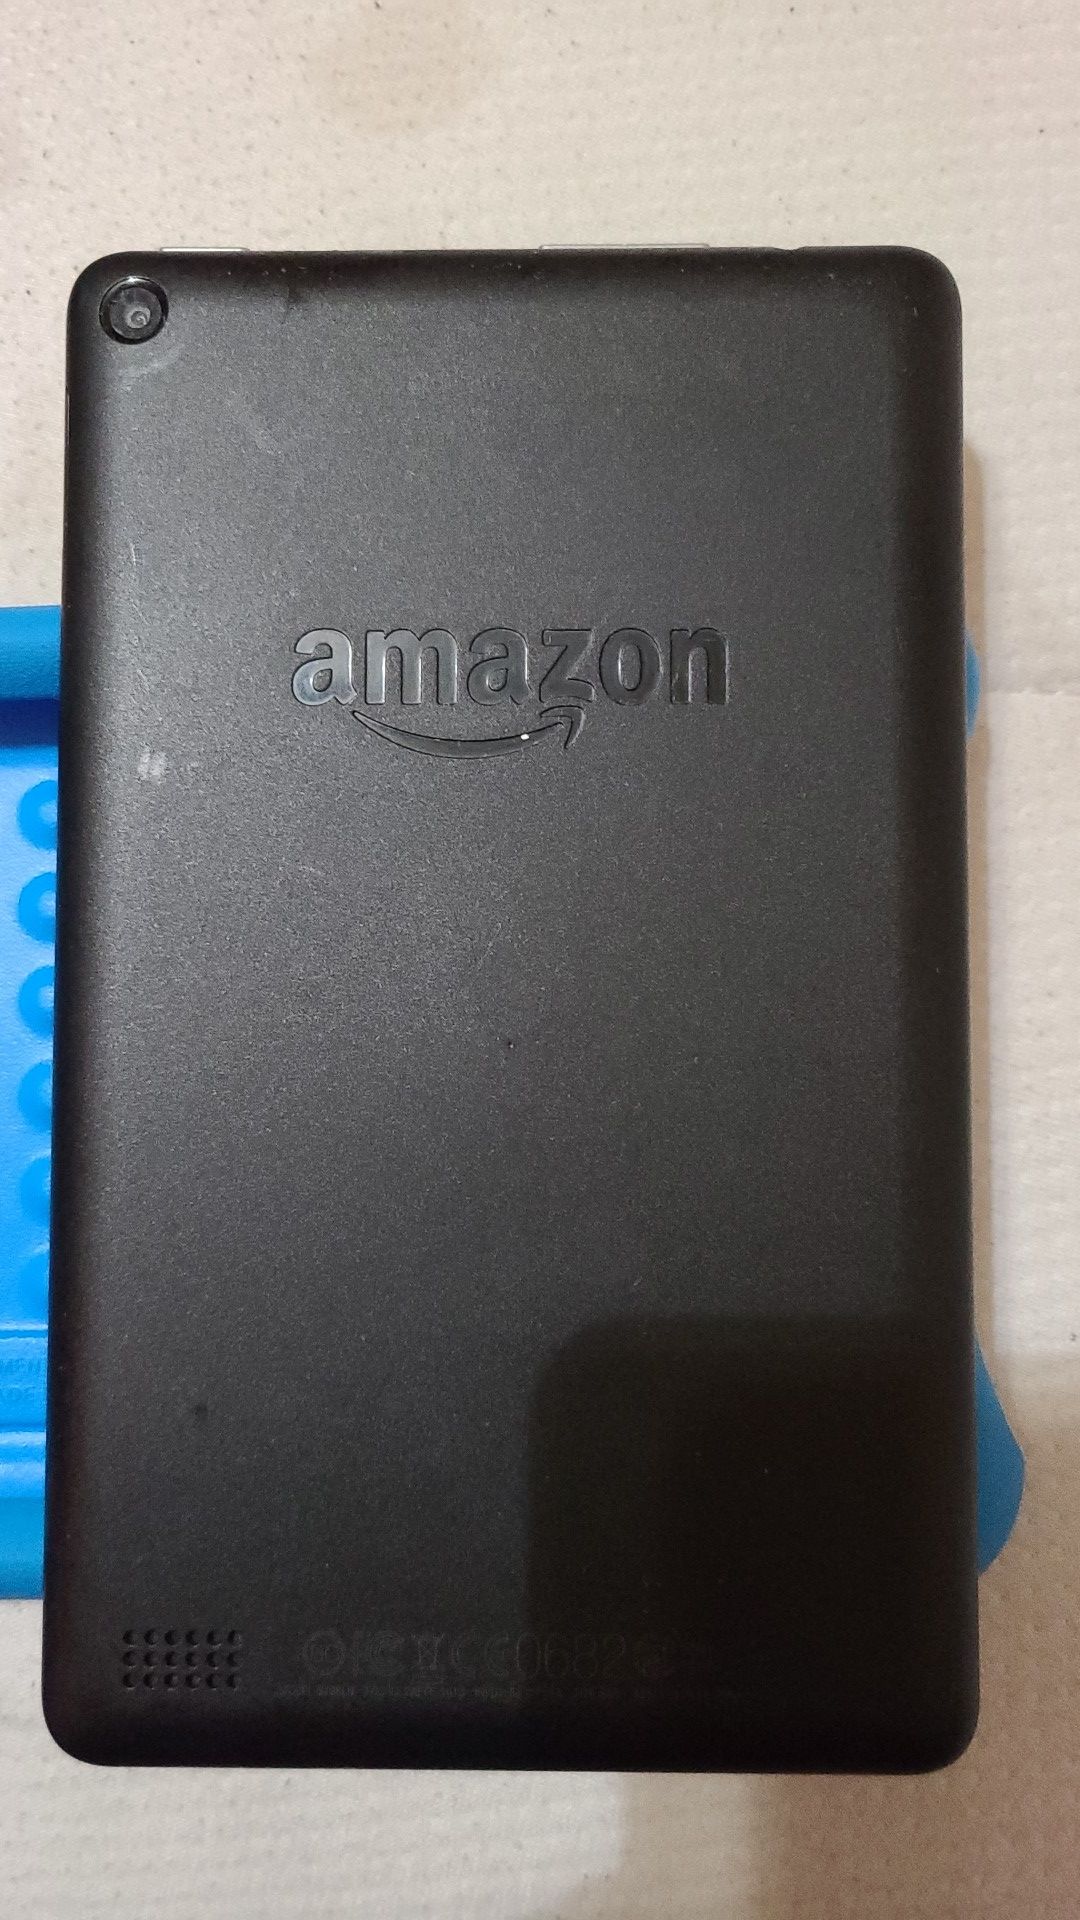 Amazon fire tablet with cover